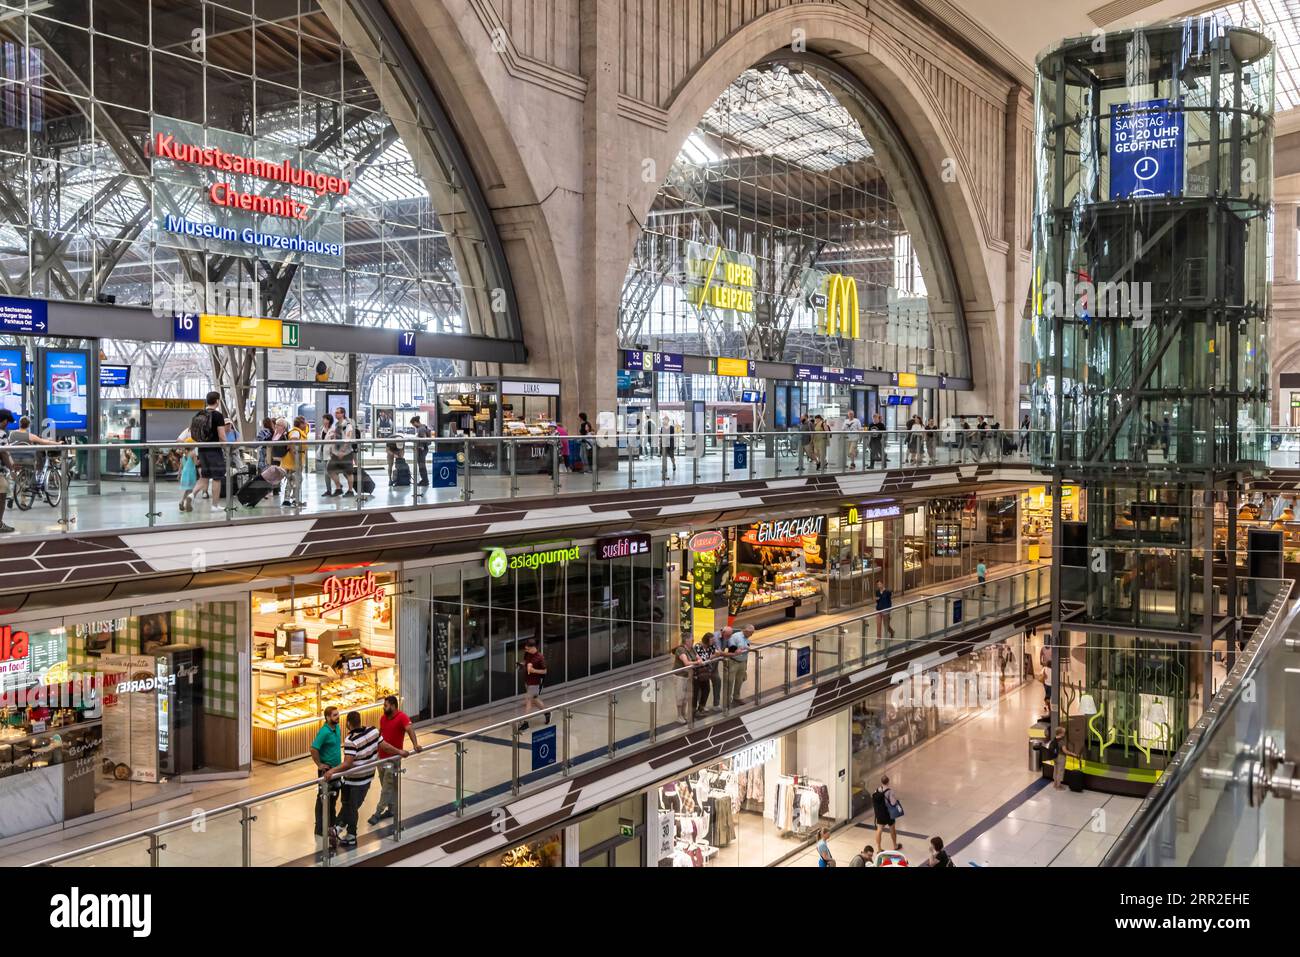 Promenades in the station building of Leipzig Central Station. Over 140 shops, restaurants and service providers on three floors fill the interior of Stock Photo